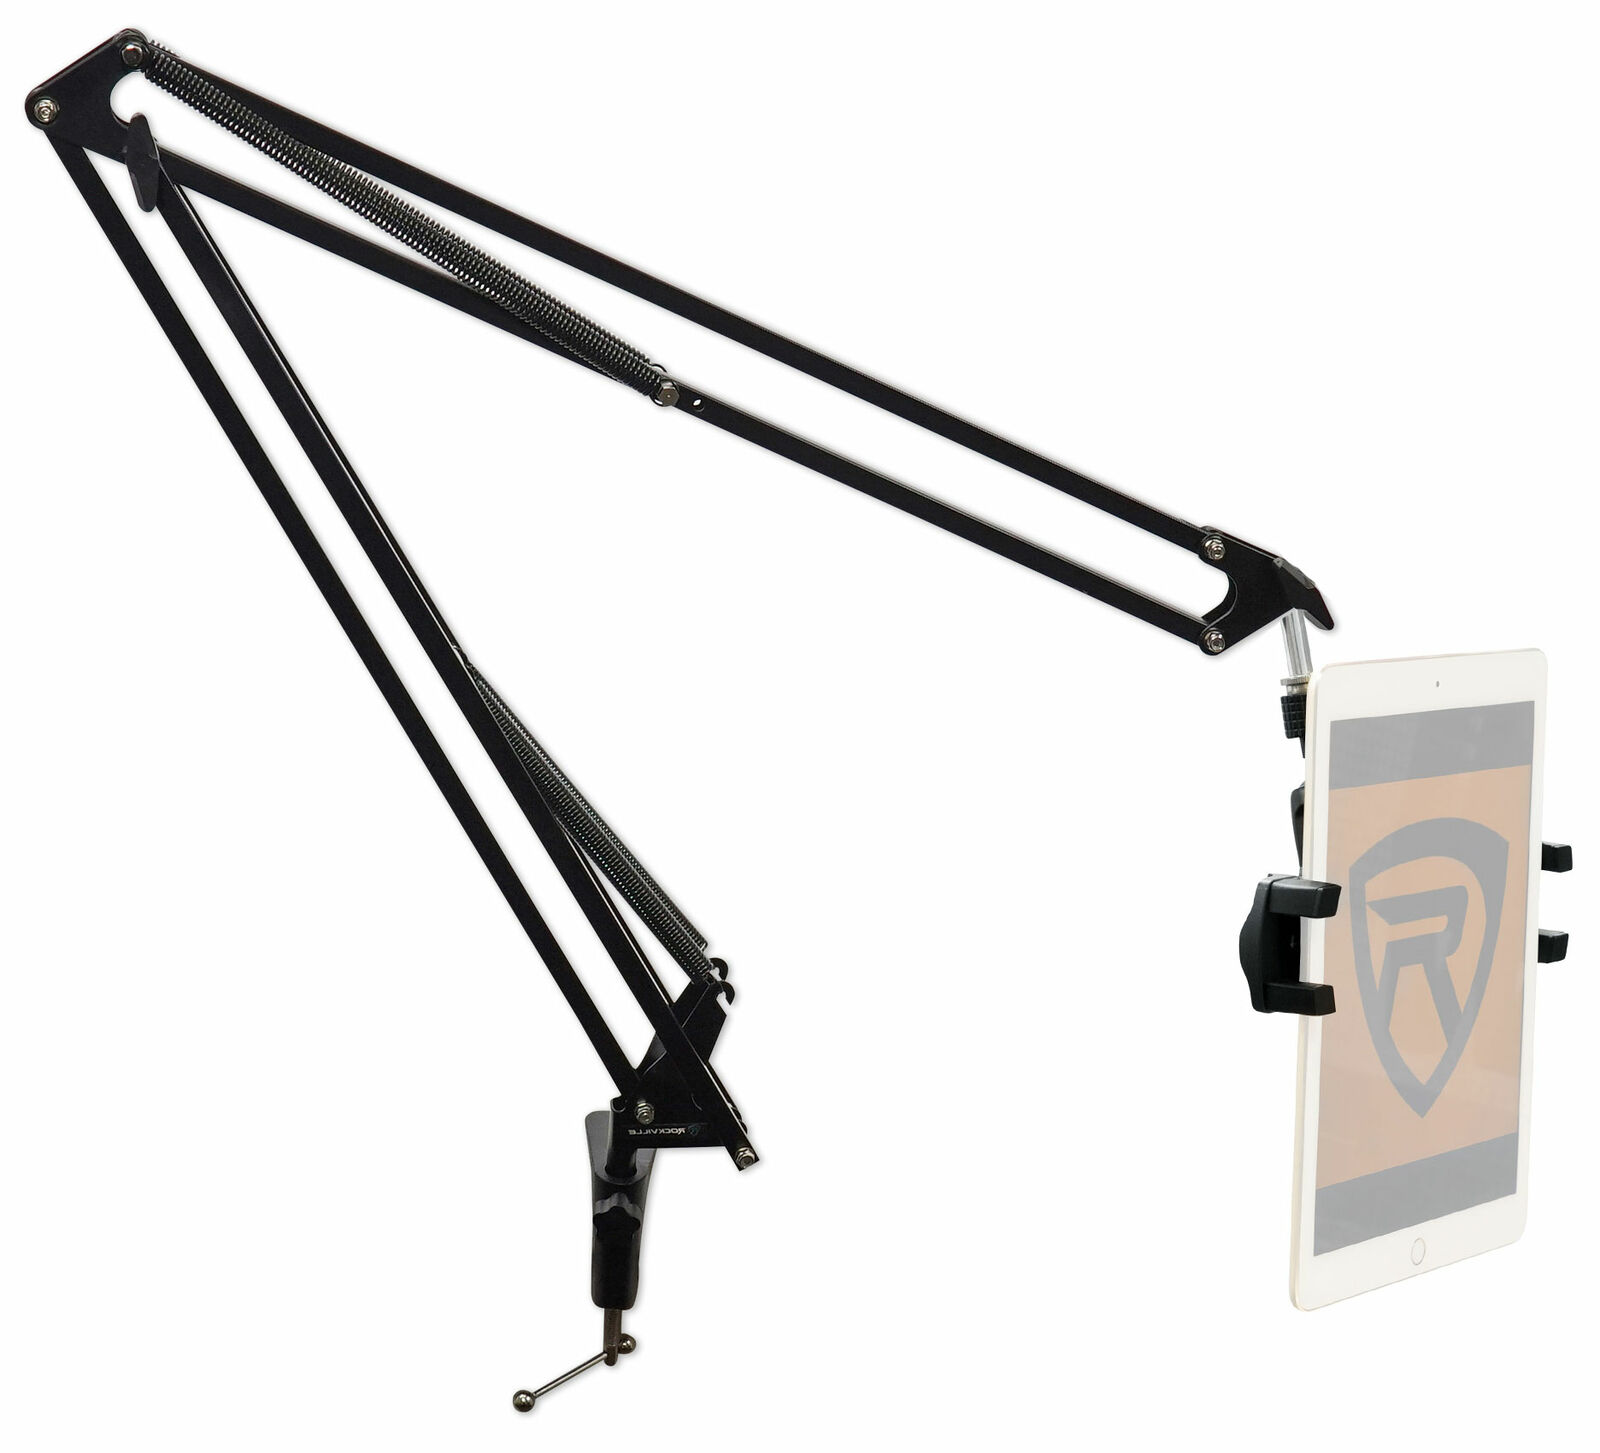 Rockville iPad/iPhone/Kindle Hands-Free Adjustable Boom Arm For Studying/Reading